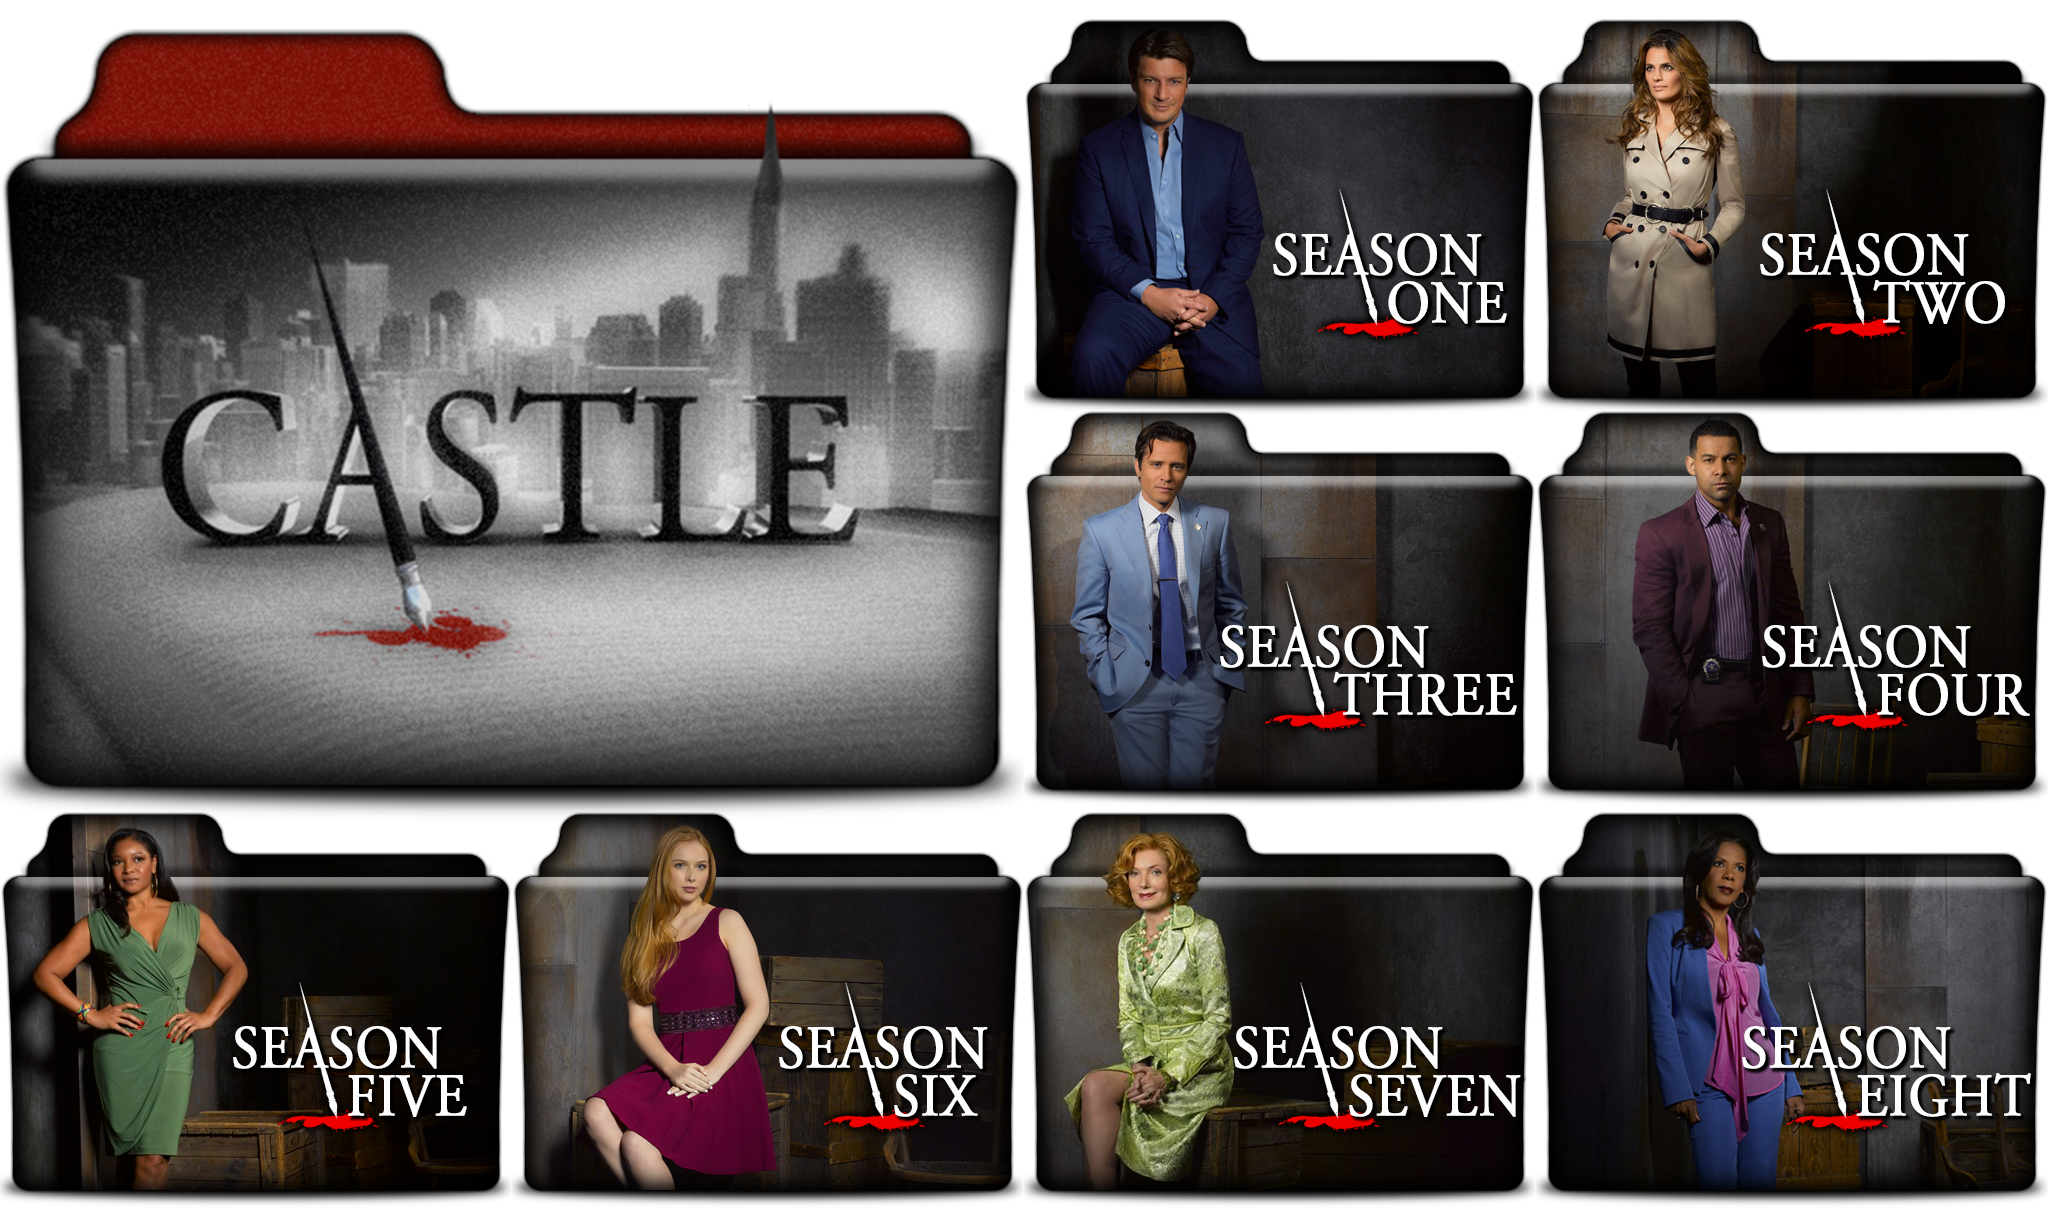 Castle TV Show Folders in PNG and ICO by vikkipoe24 on DeviantArt